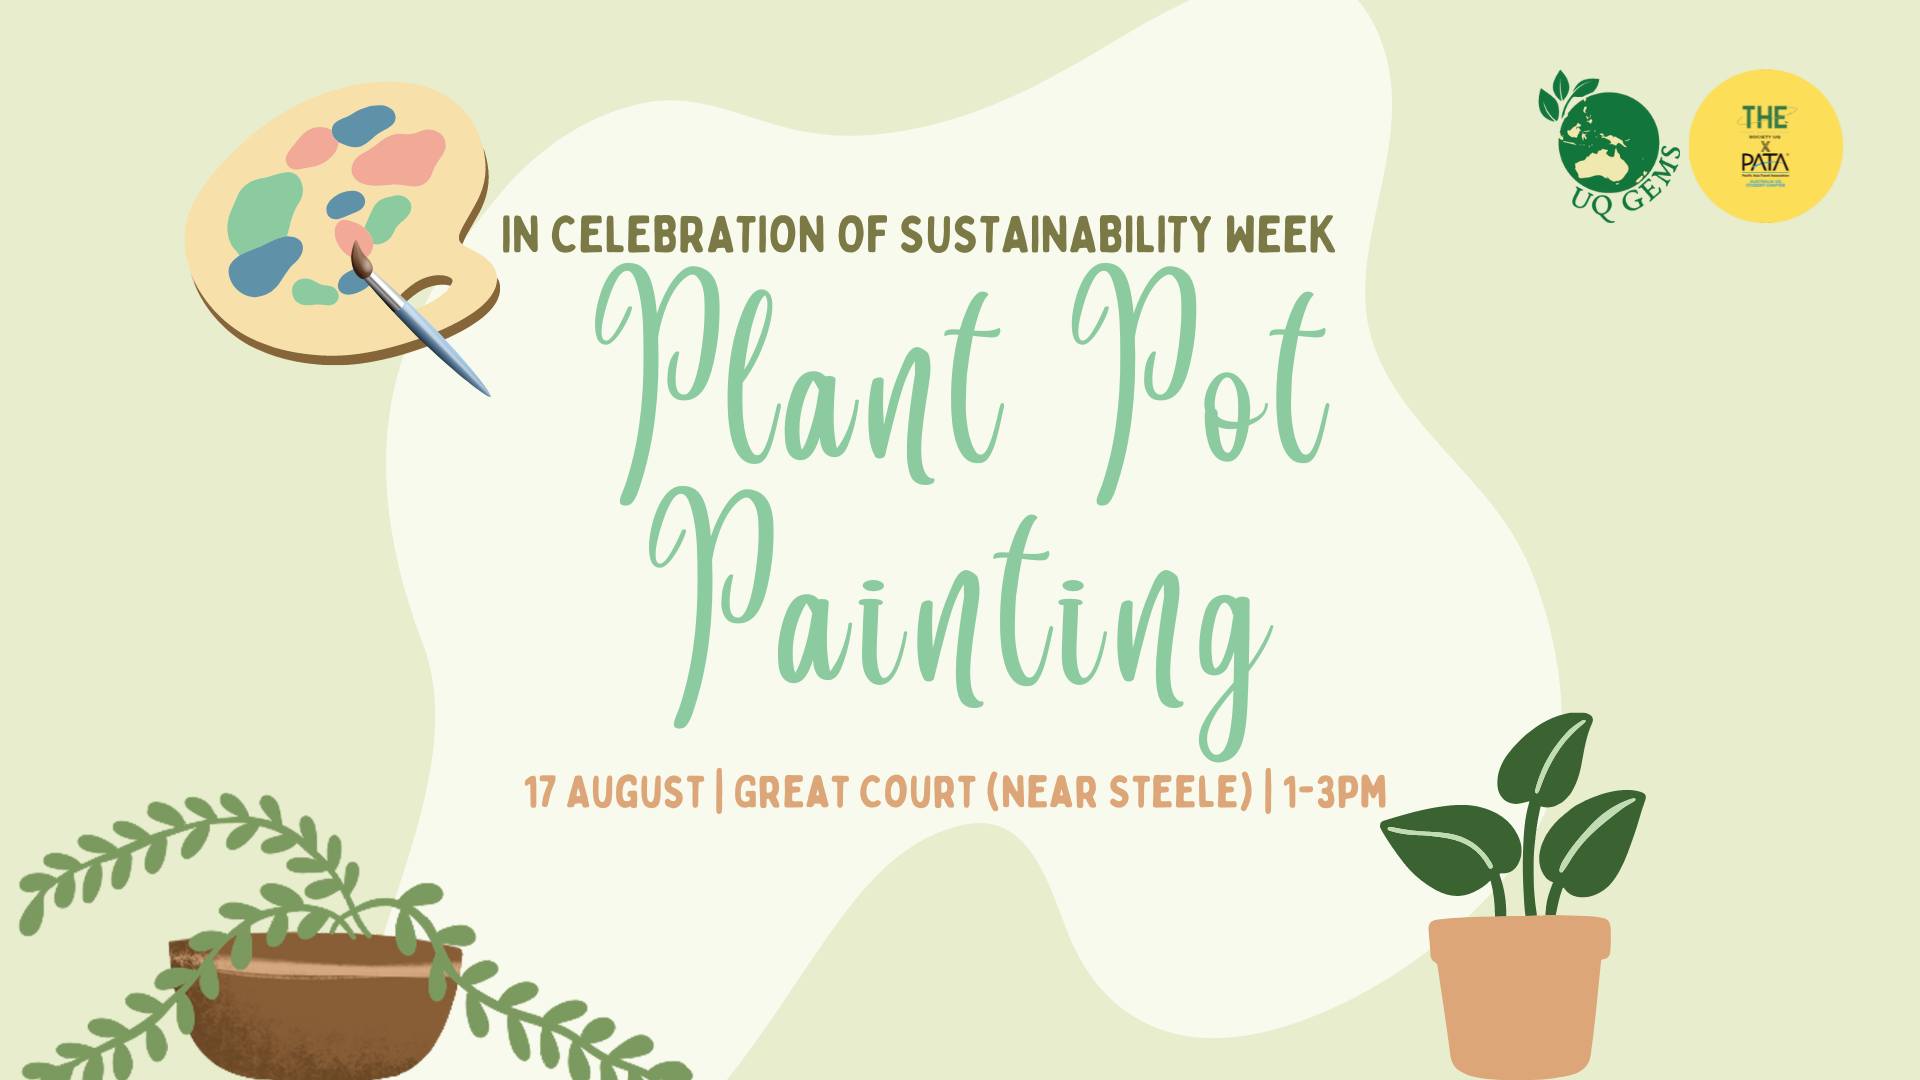 Plant pot painting poster